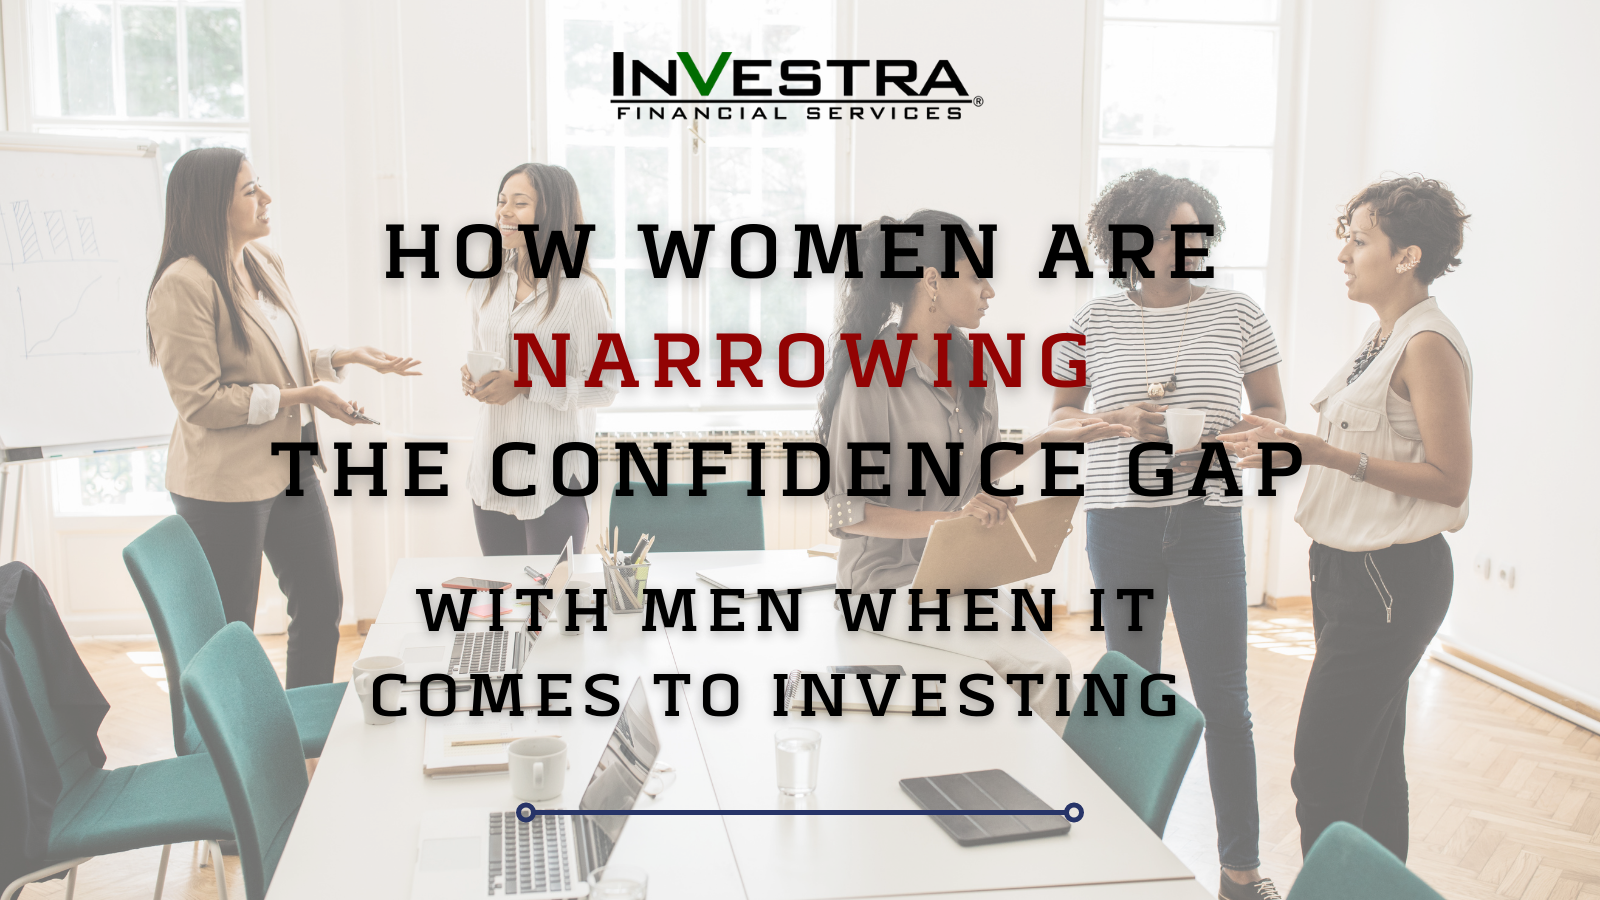 Women are Continuing to Narrow the Confidence Gap With Men When It Comes to Investing